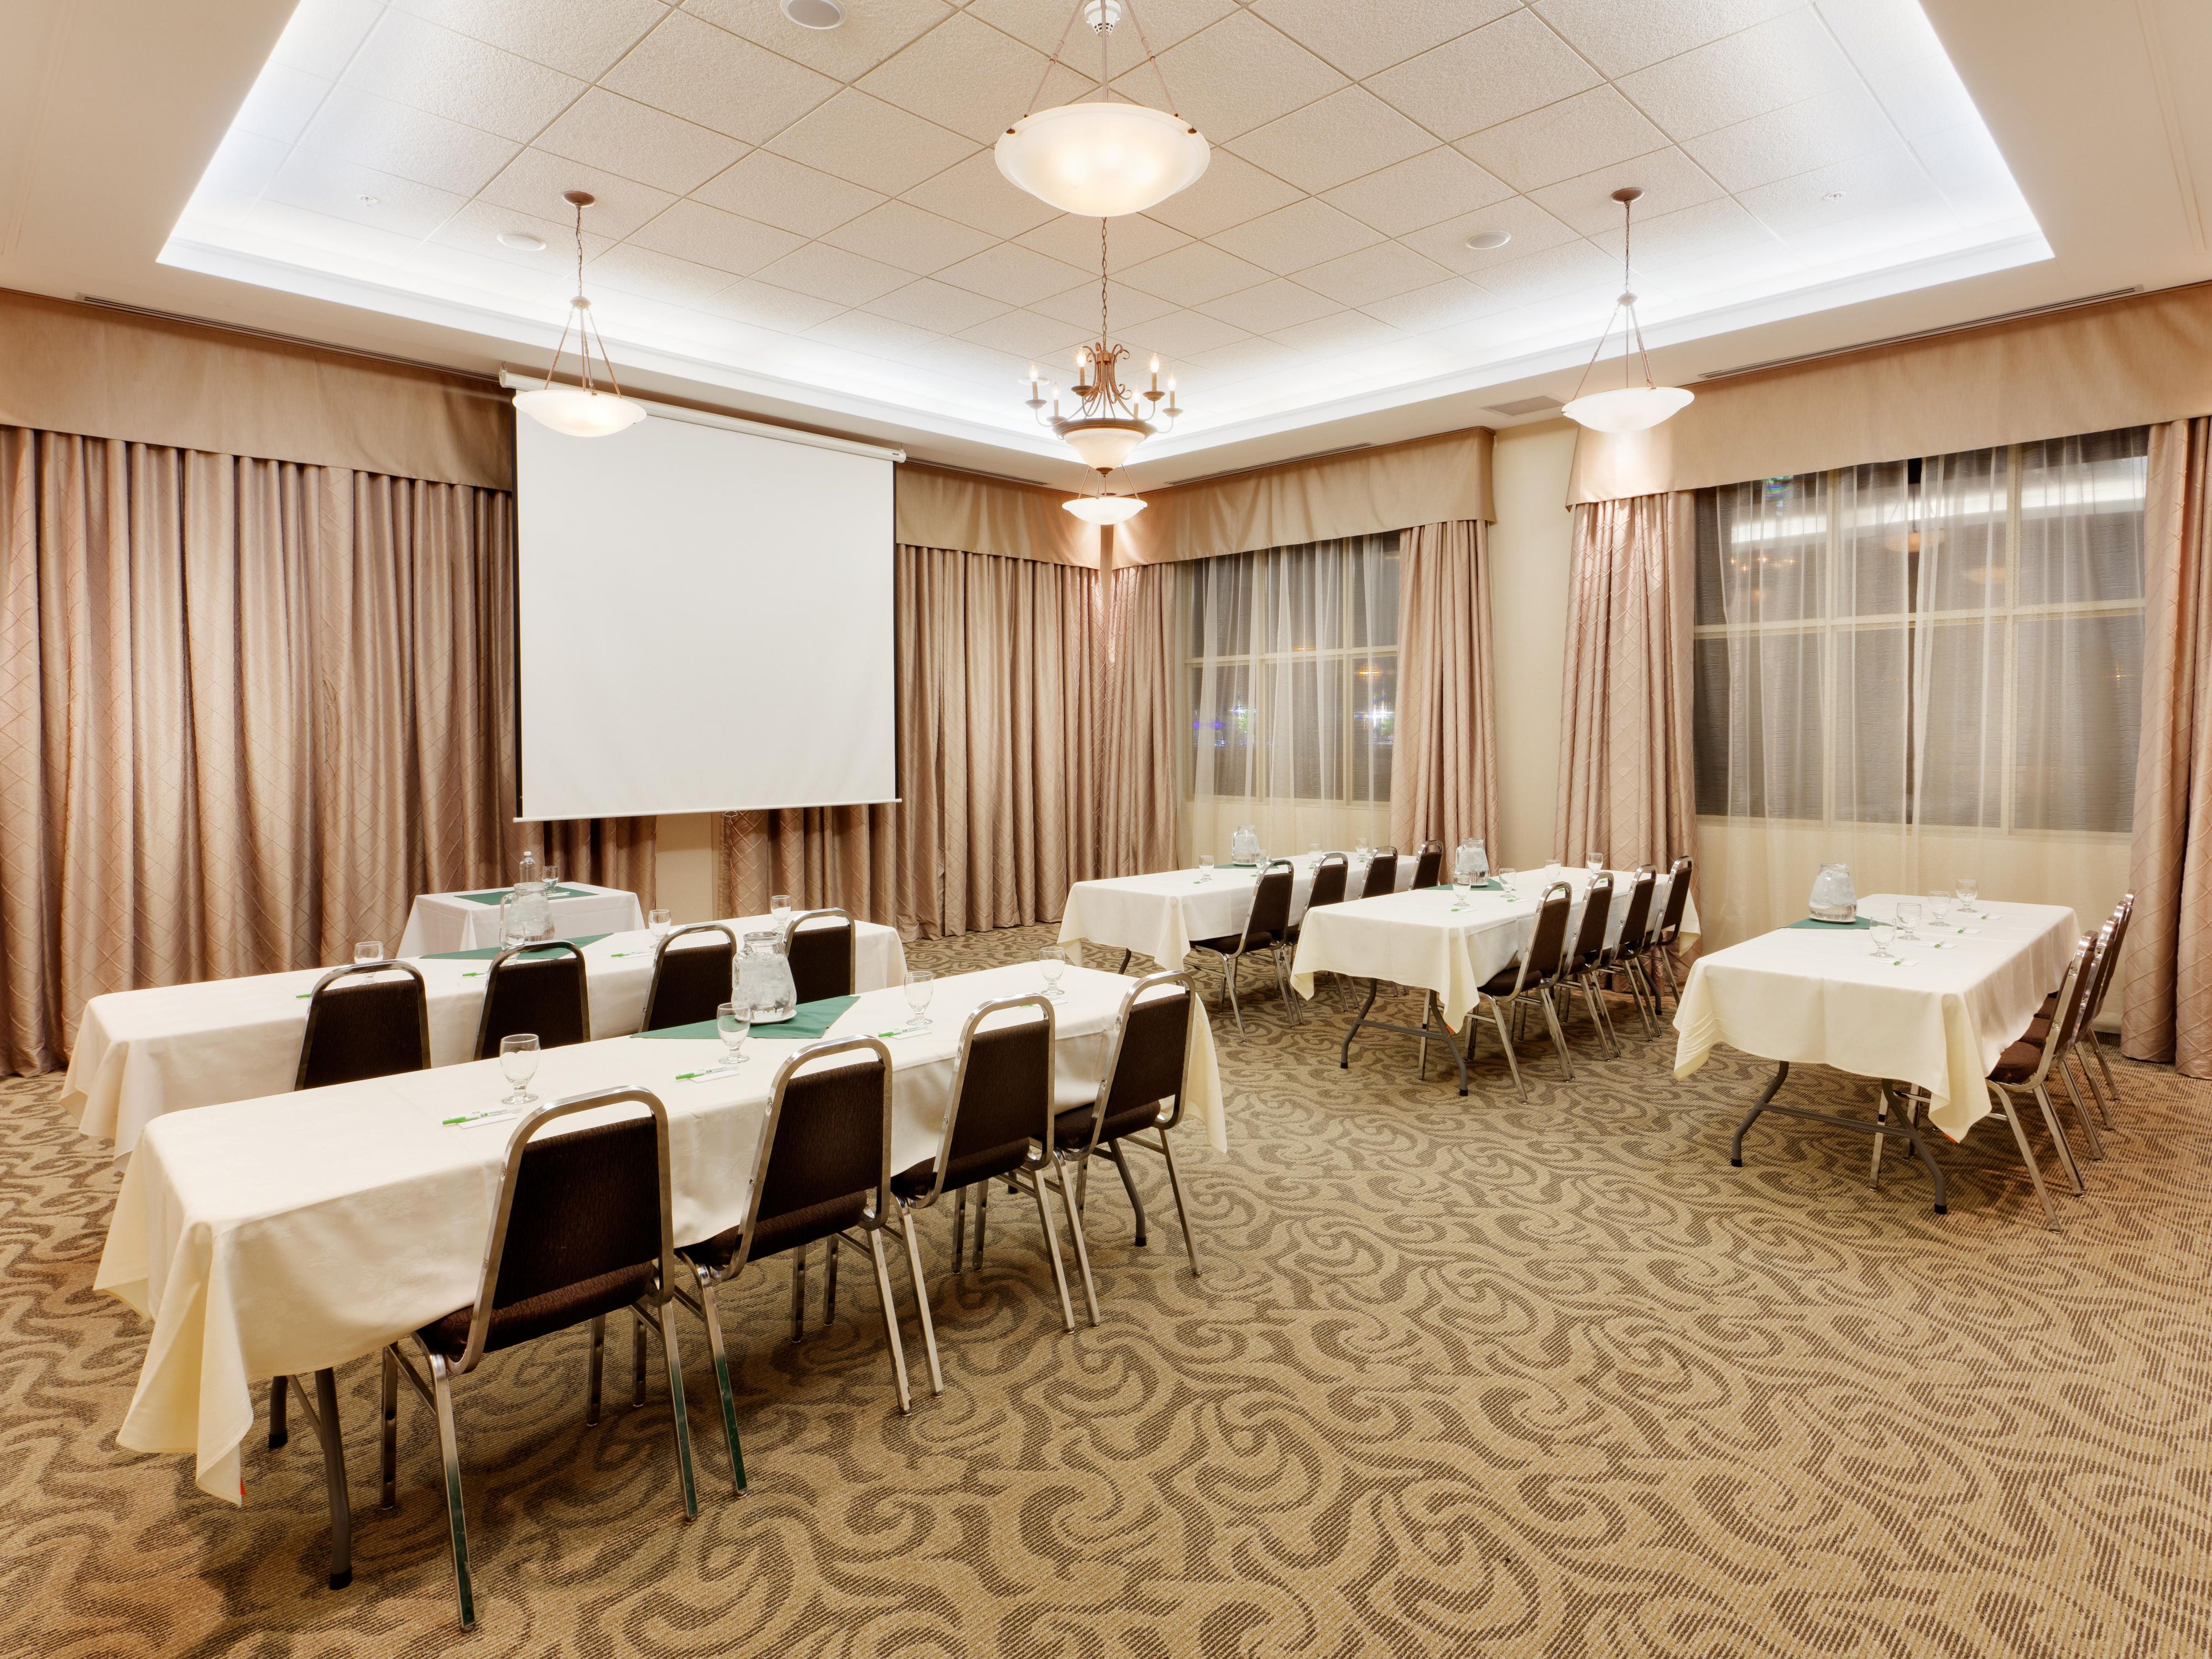 Looking for the perfect event venue? Look no further! At Holiday Inn Lethbridge, our dedicated team ensures your event's success. Choose from a range of private rooms, suitable for anniversaries, seminars, birthdays, product launches, trade shows, and interviews. Your ideal event space awaits.